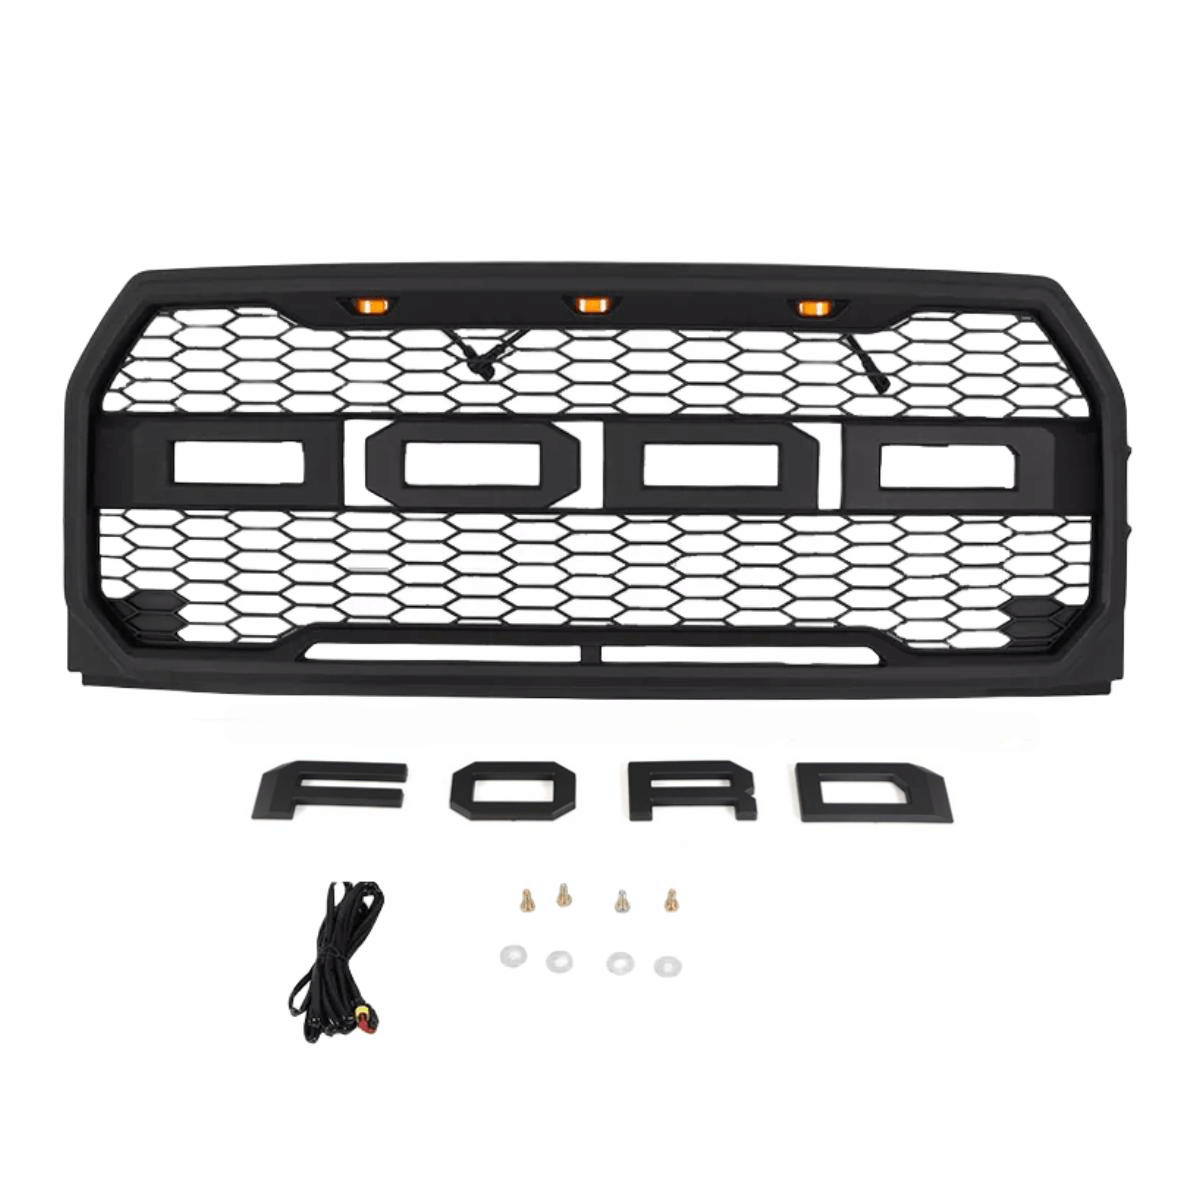 {WildWell}{Ford Grill}-{Ford F150 Grill 2015-2017/5}-Front